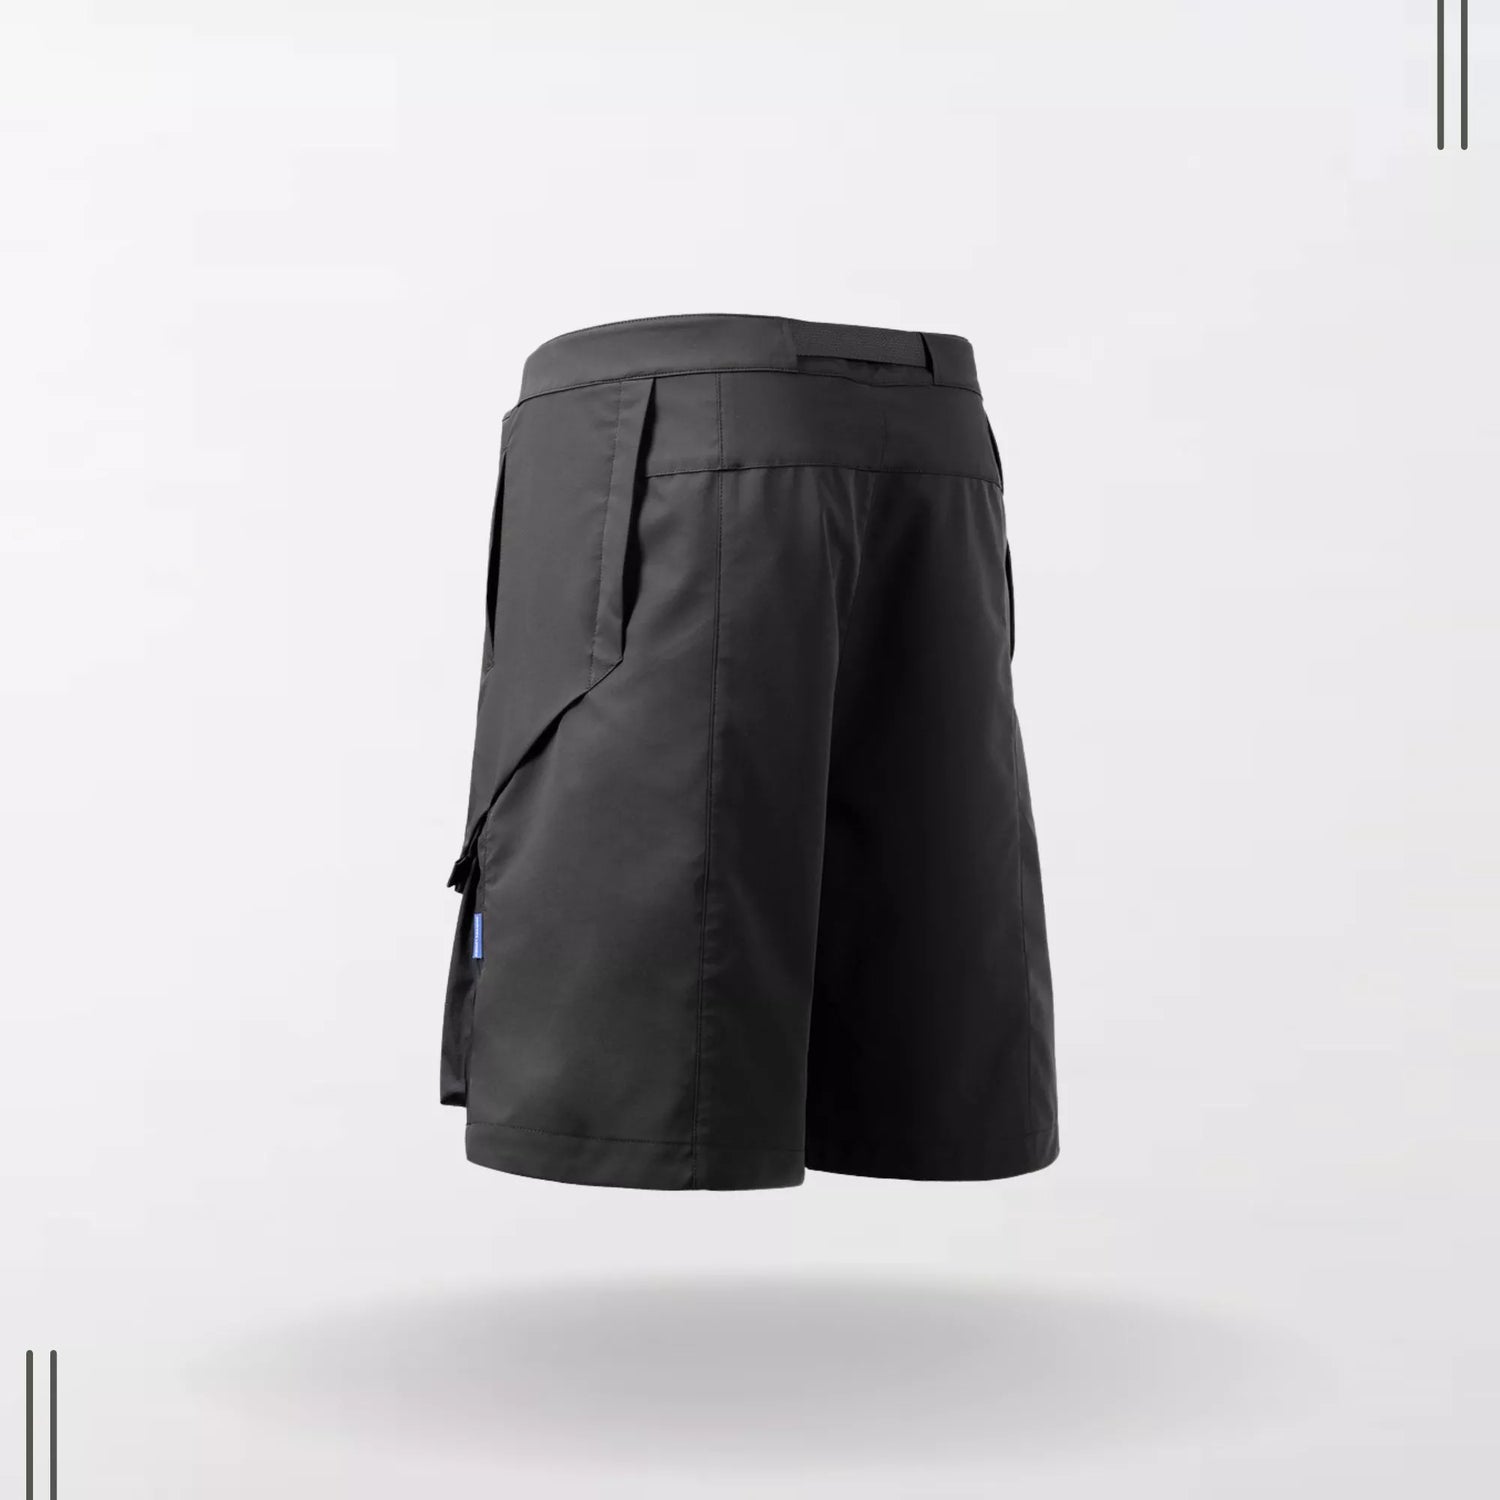 3D Curved Waterproof Summer Techwear Shorts By Clotechnow